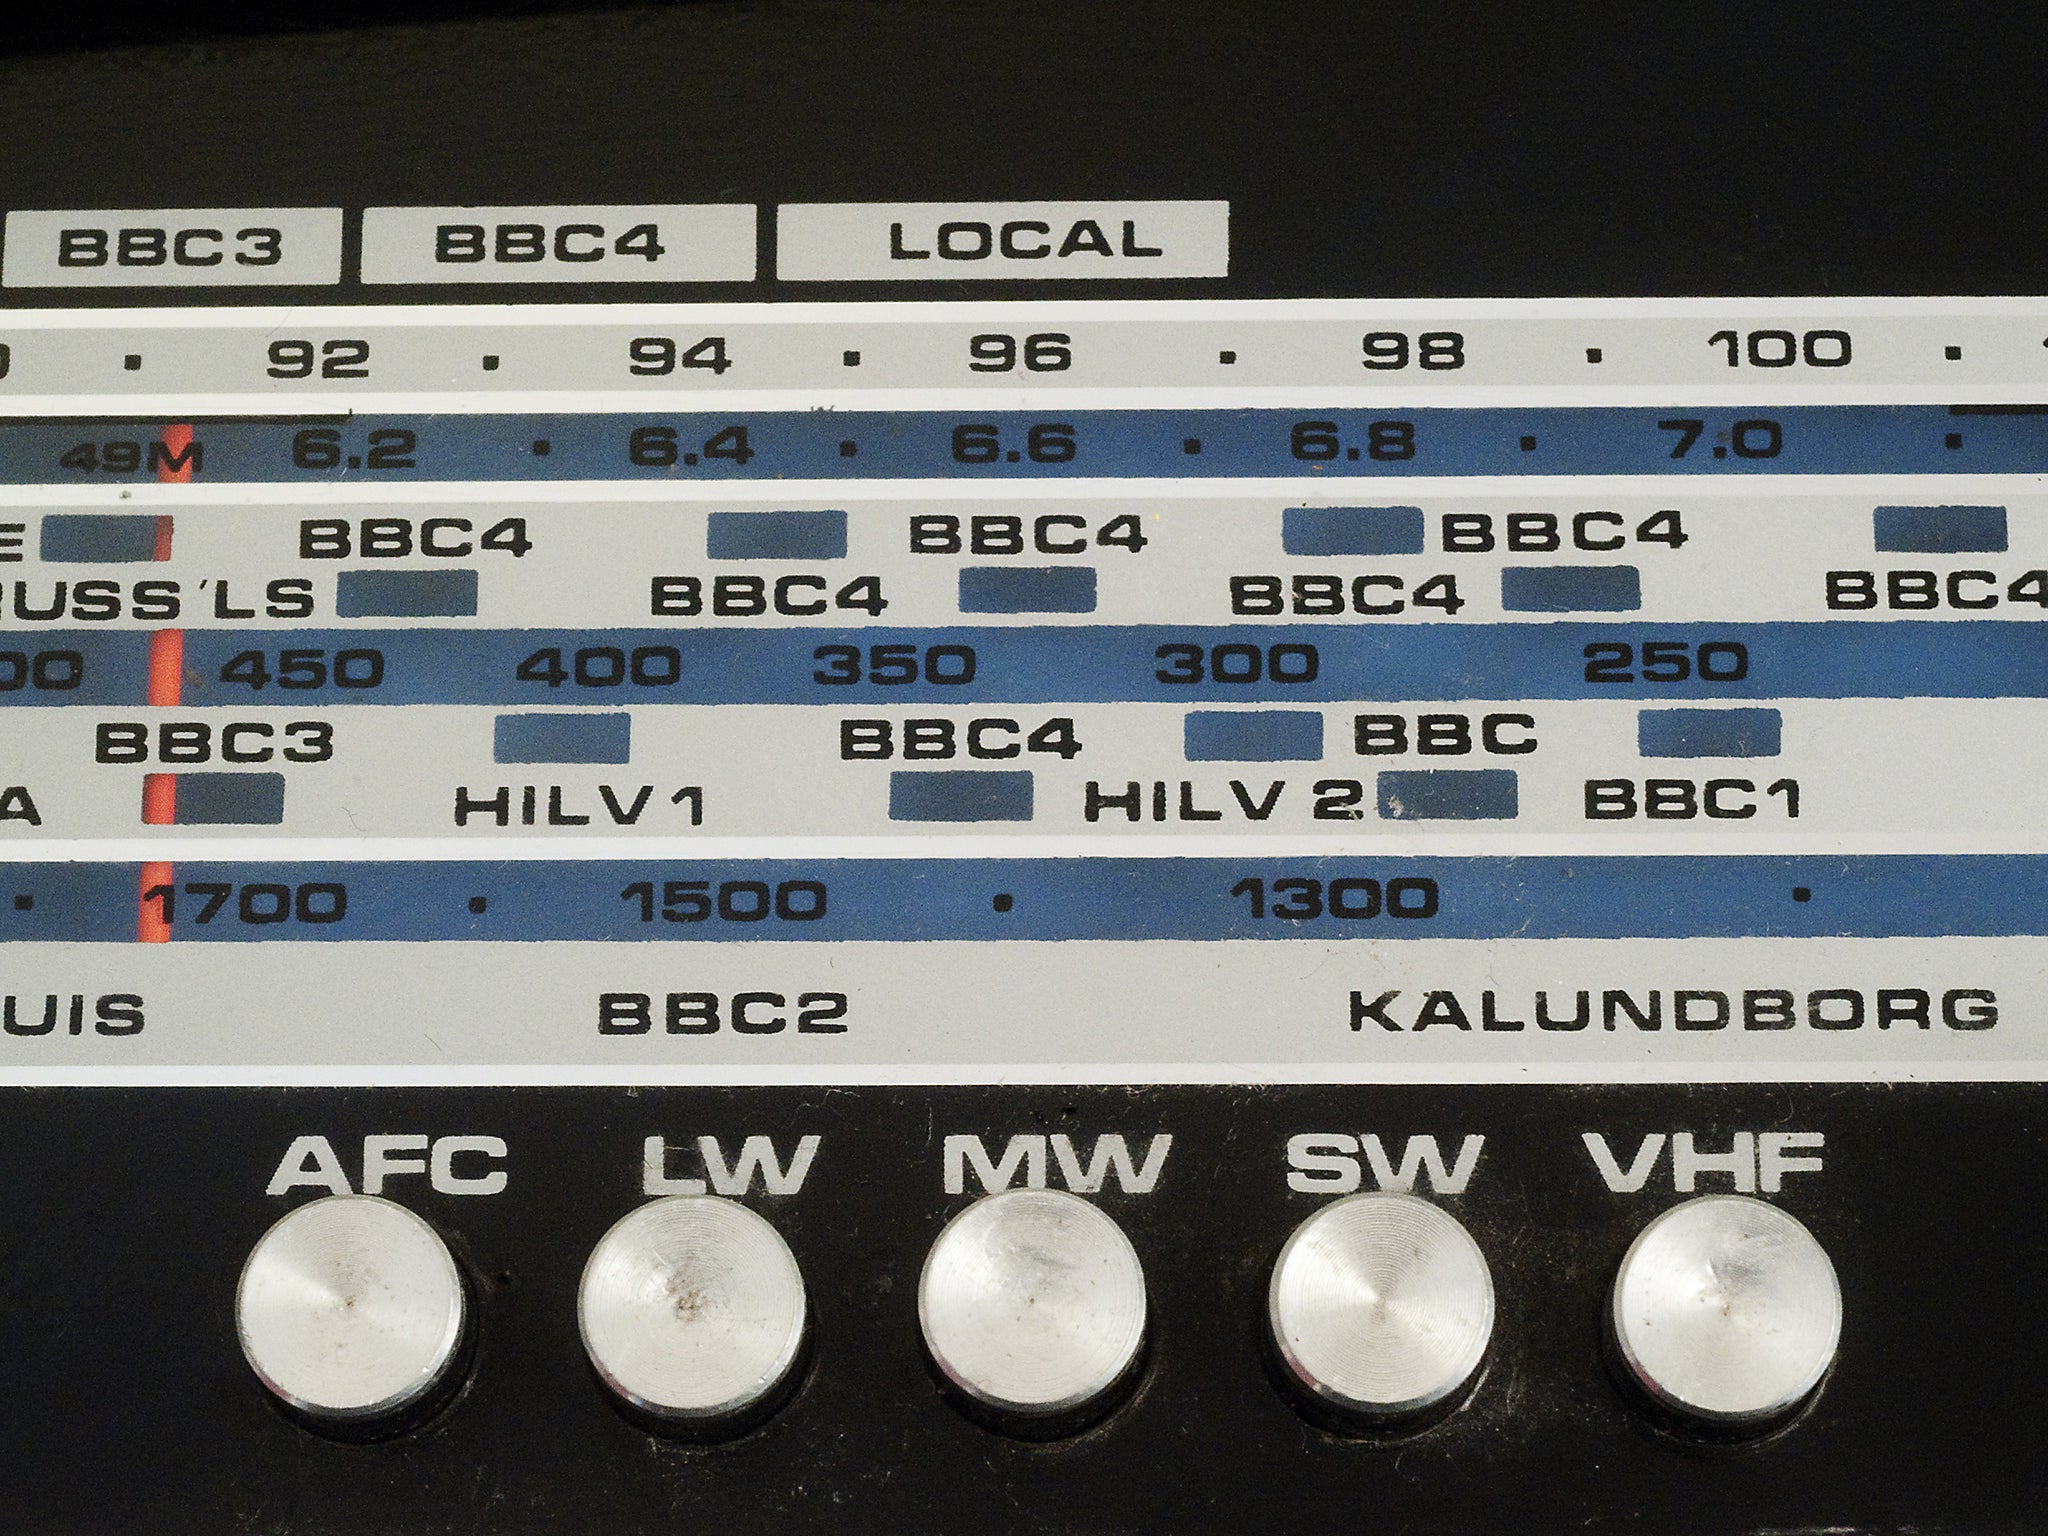 Old analogue radio tuning dial showing FM stations